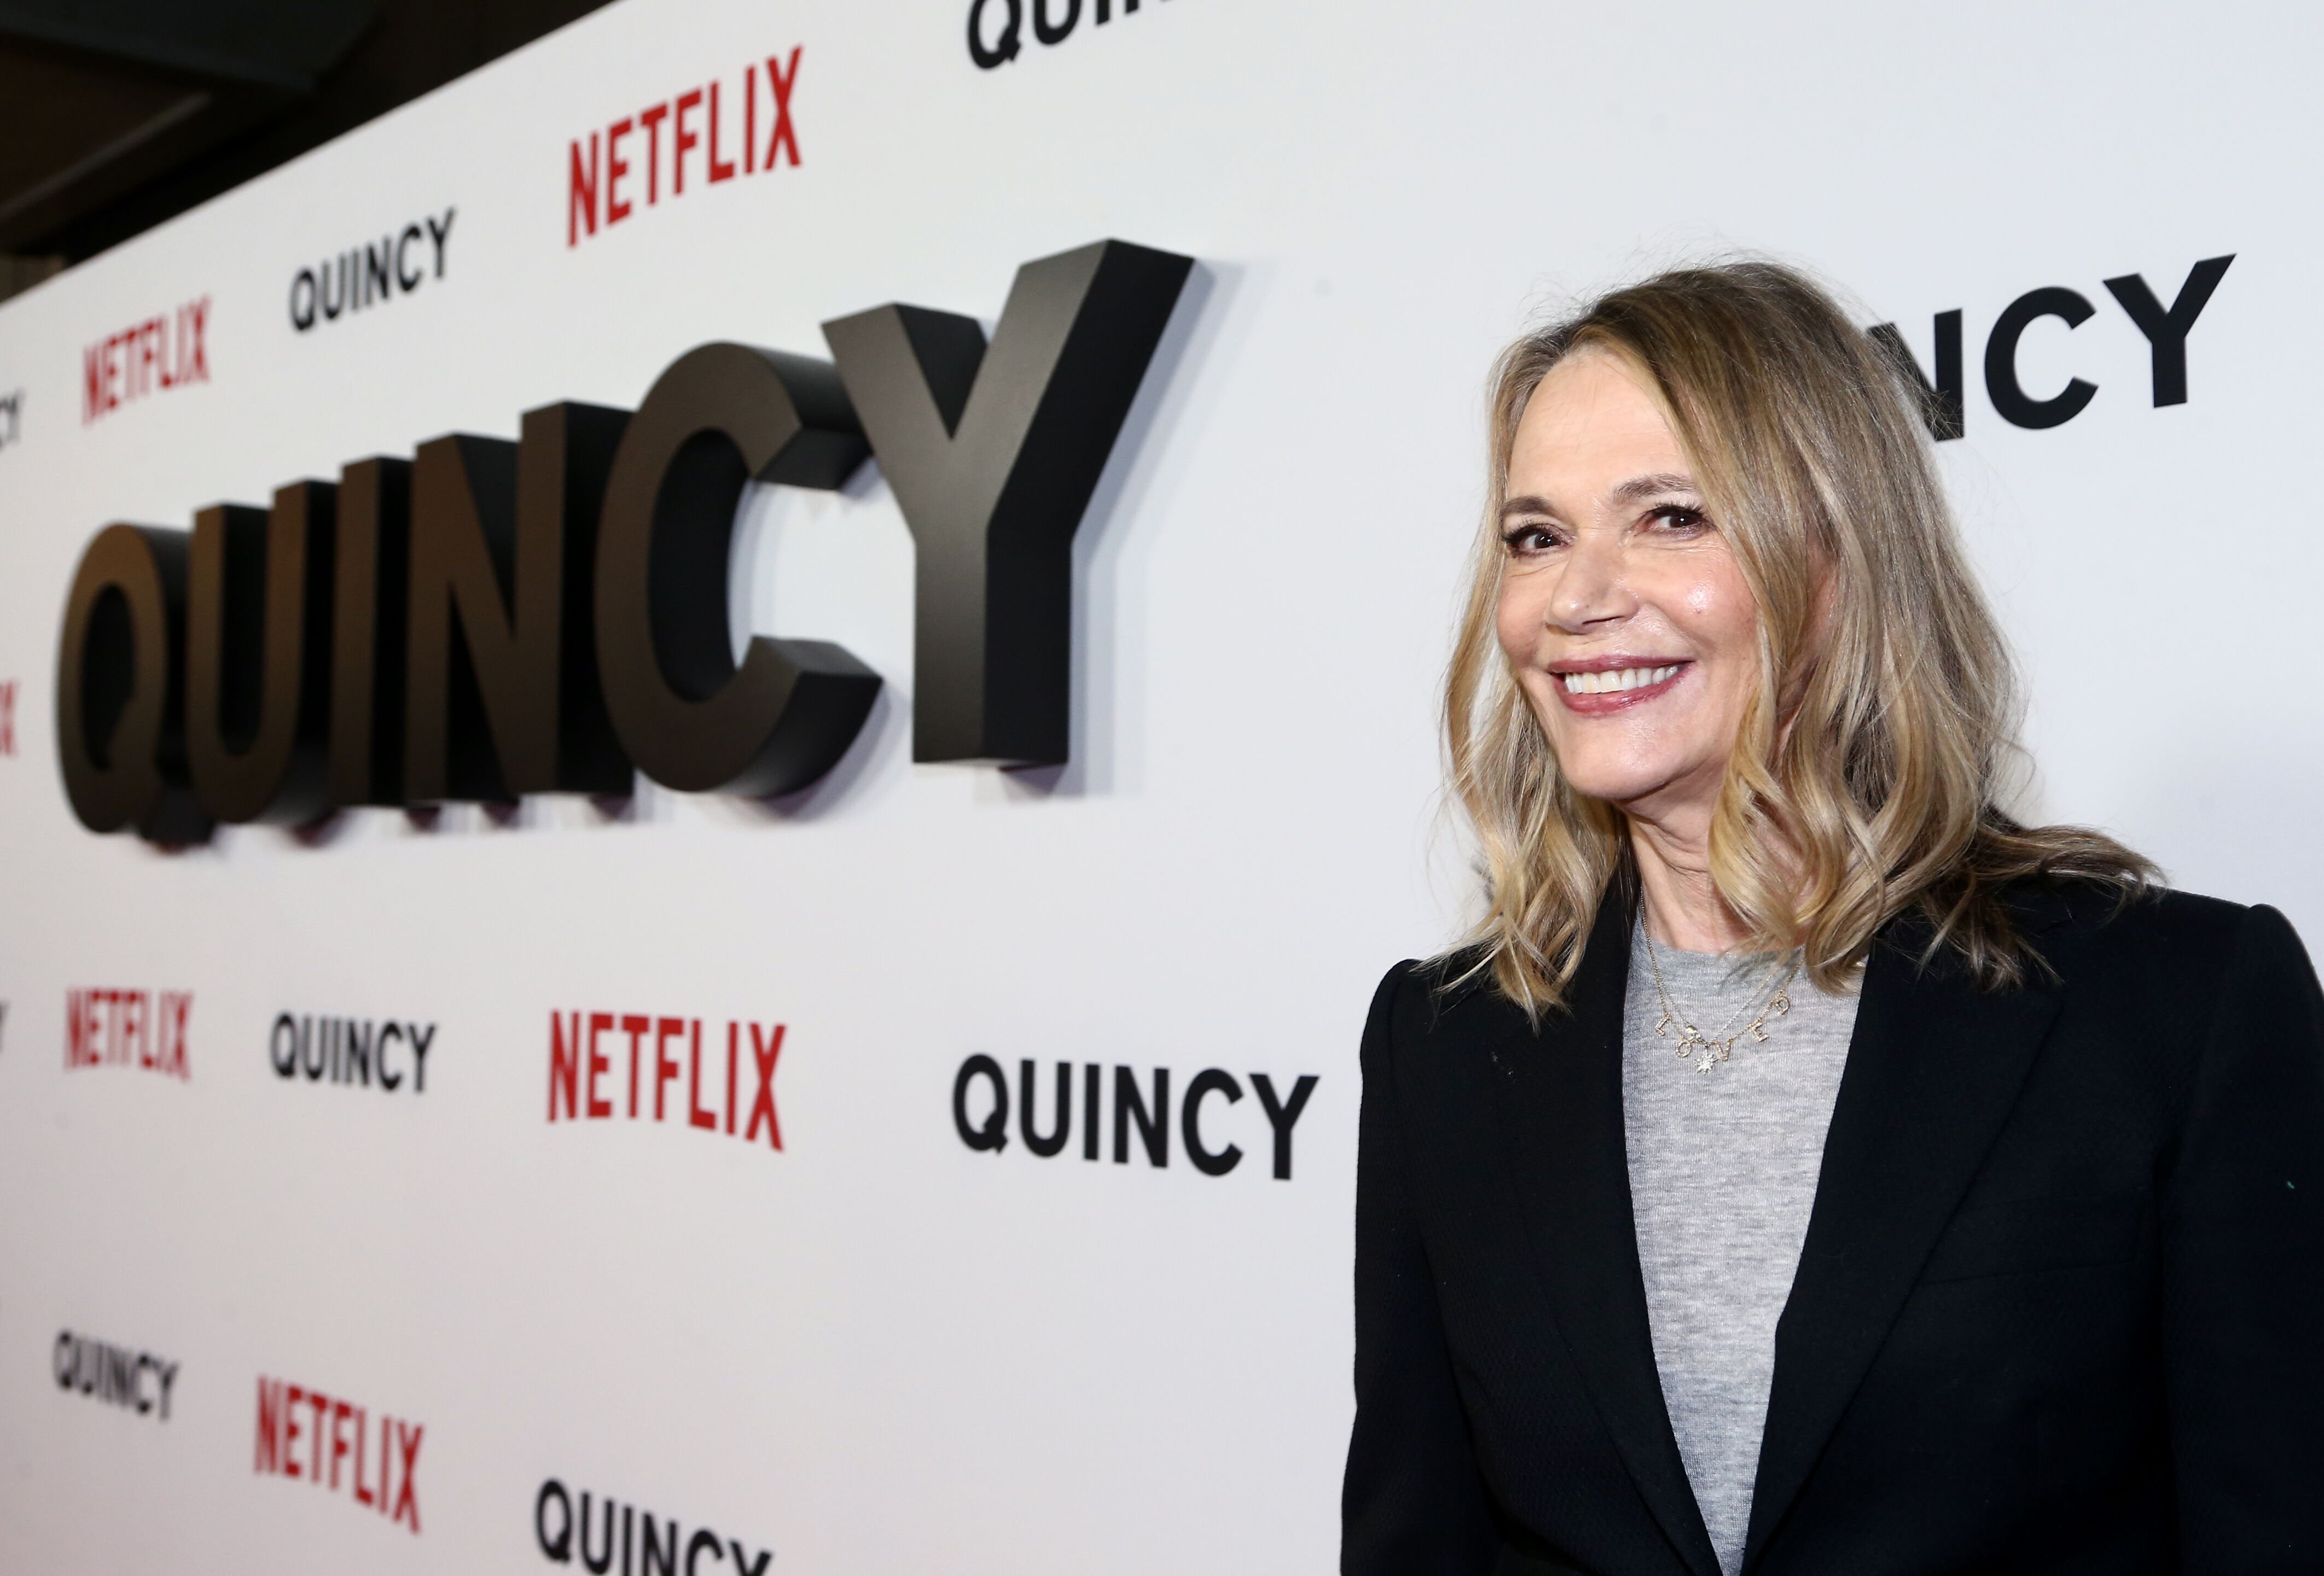 Peggy Lipton at the premiere of Netflix's "Quincy." | Source: Getty Images